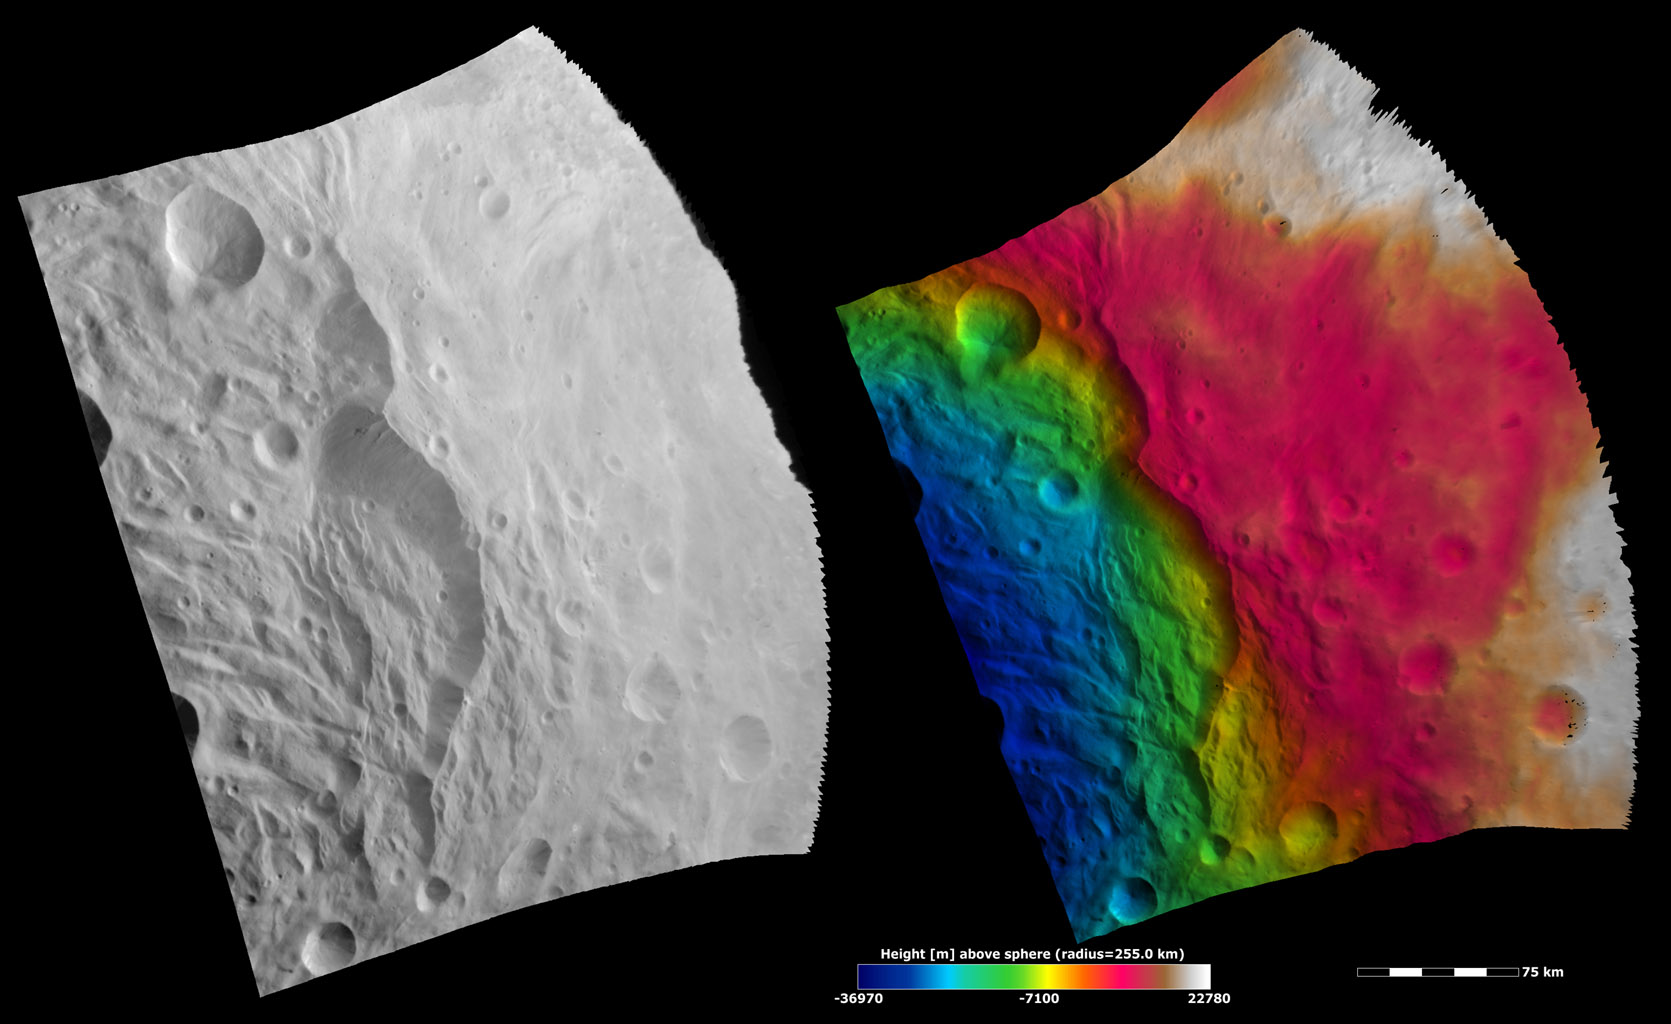 Topography of a Scarp and Hummocky Terrain